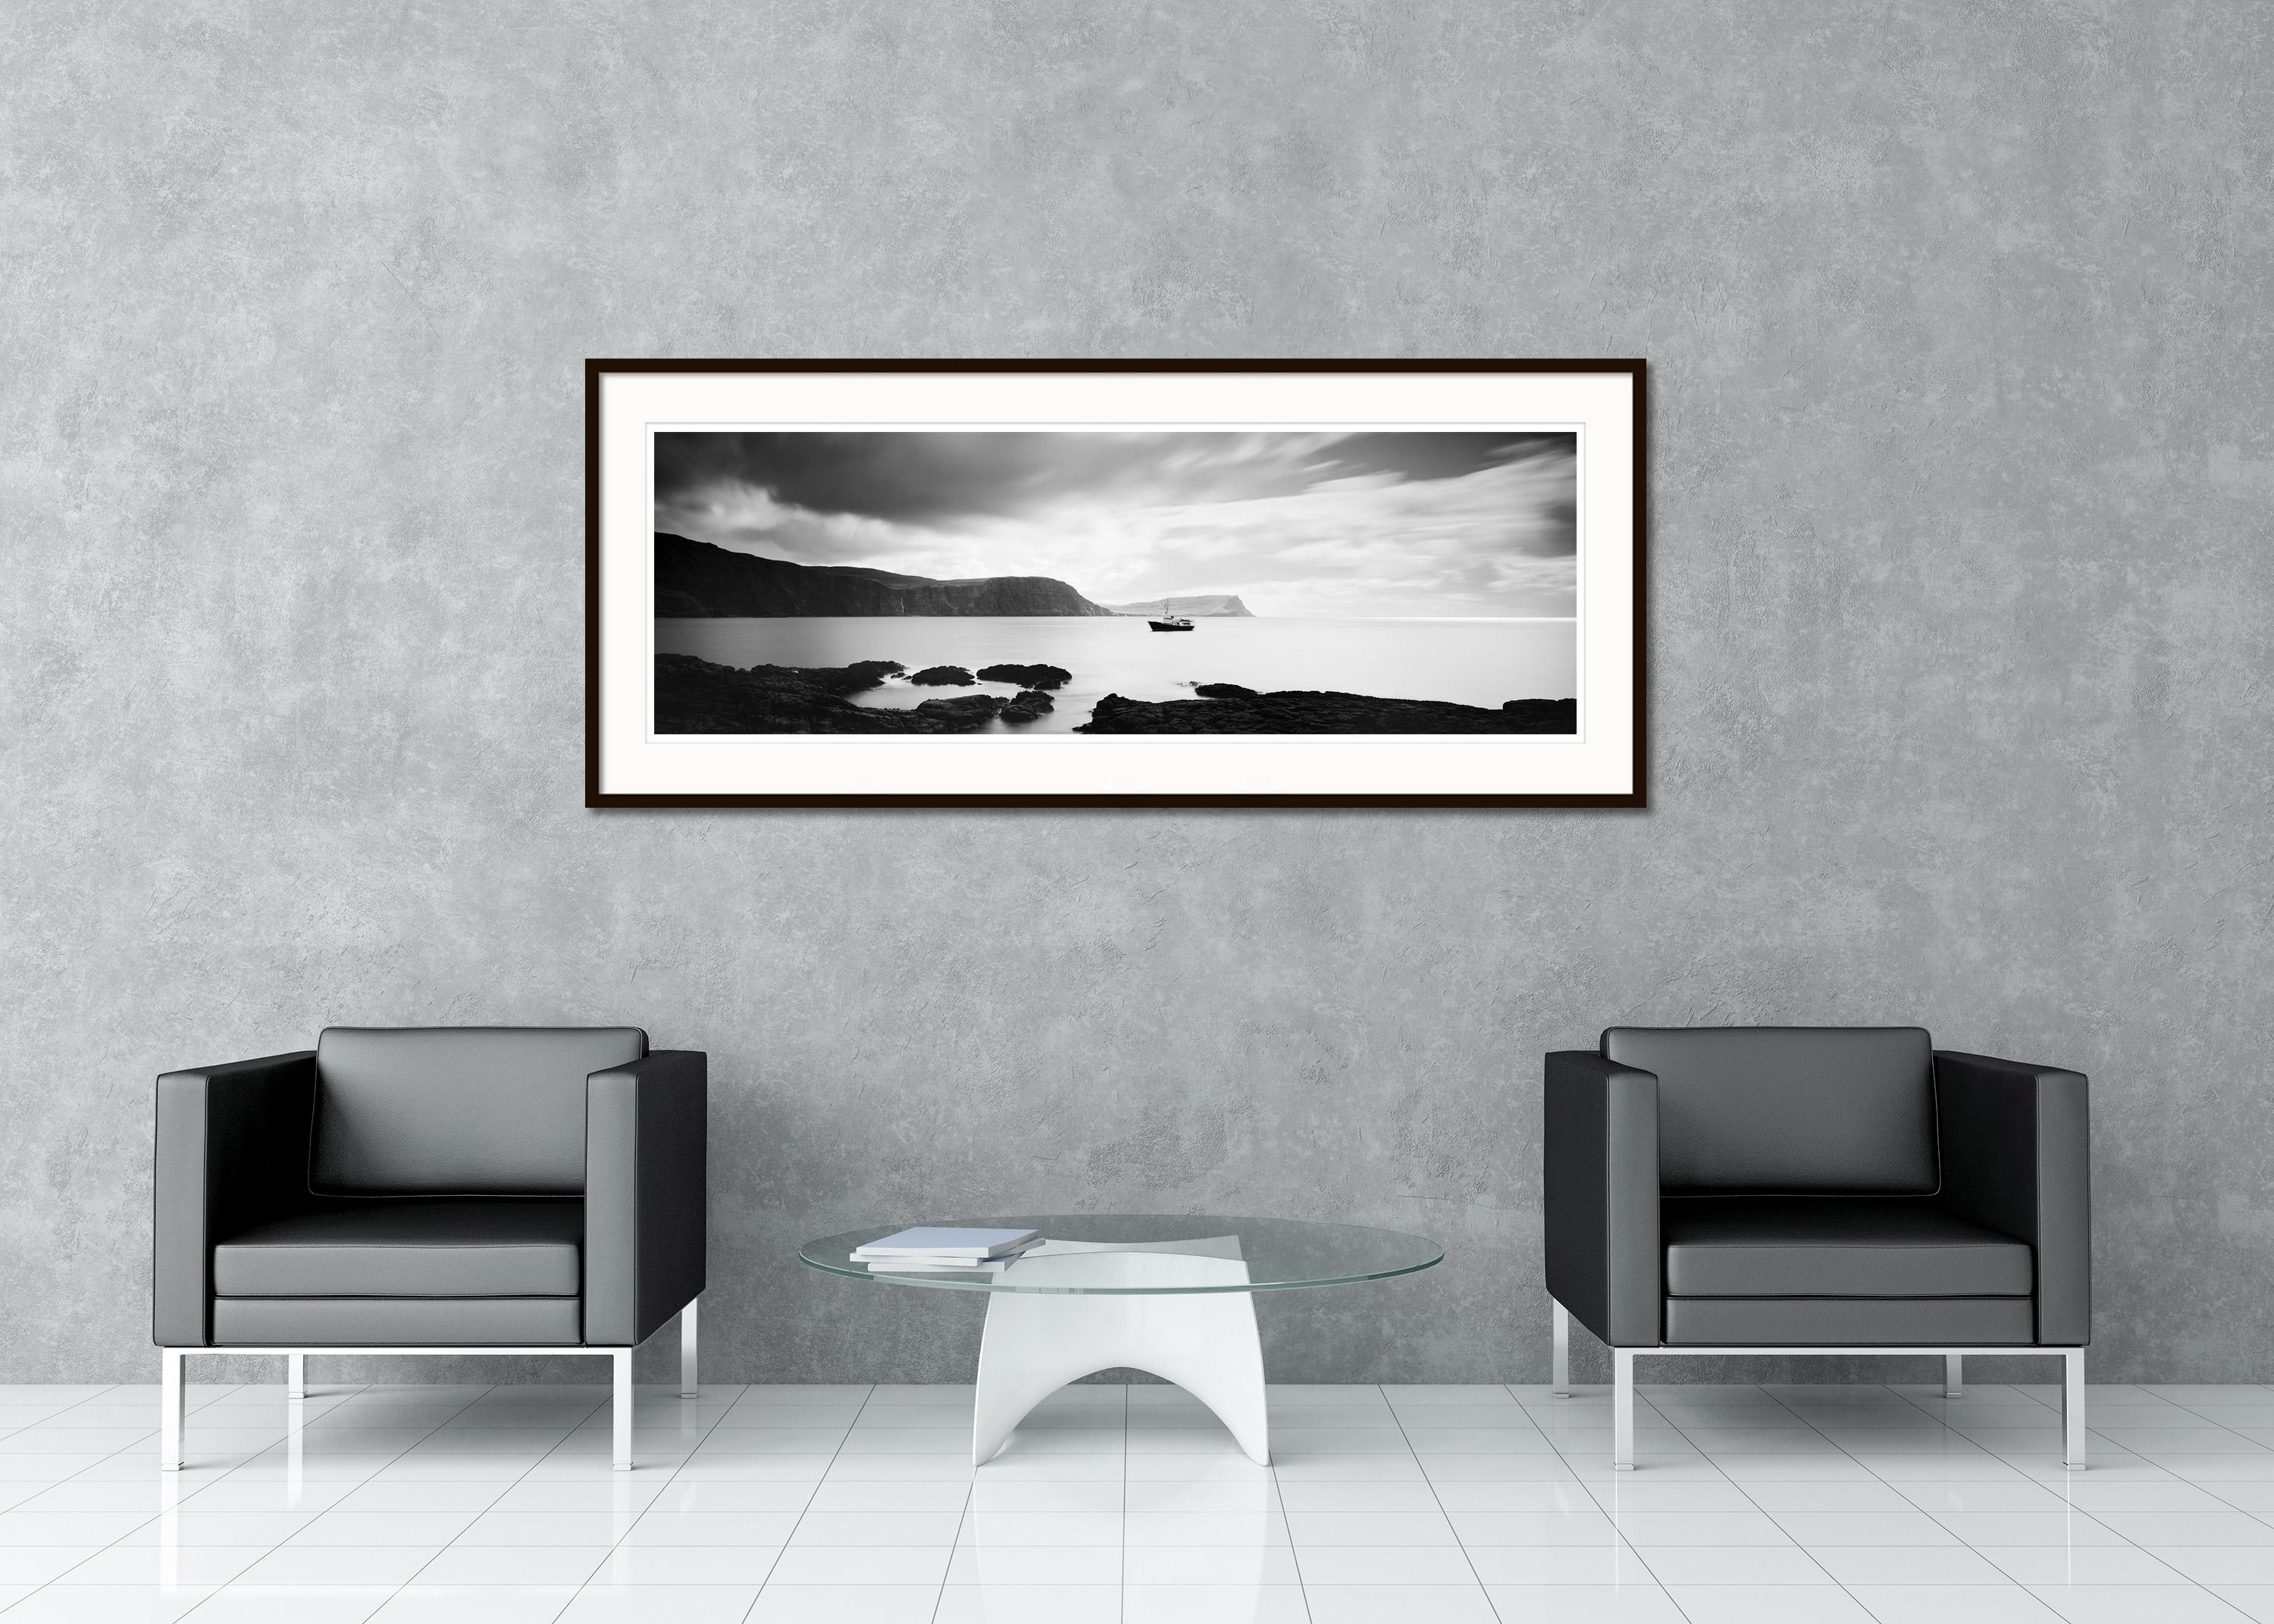 Black and White Fine Art Panorama Photography - Fishing boat at Neist Point in Scotland with fantastic coastline in stormy weather. Archival pigment ink print, edition of 9. Signed, titled, dated and numbered by artist. Certificate of authenticity